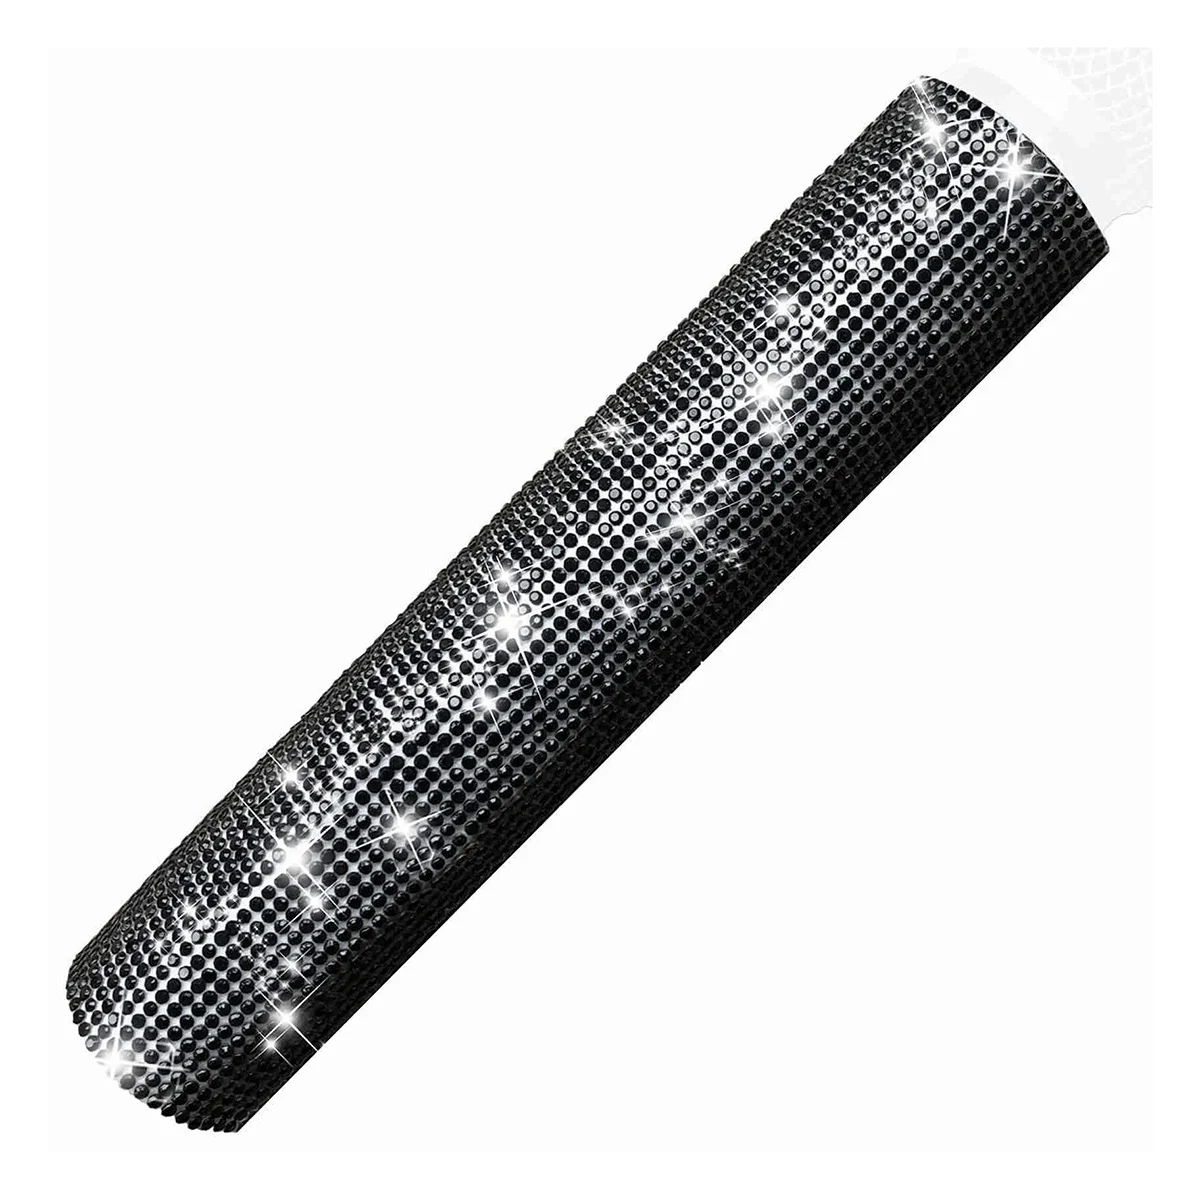 

Mic Handle Cover,Sparkly Bling Rhinestones Mic Handle Sleeve for Party&TV Show,for Most Wireless Microphones, Black